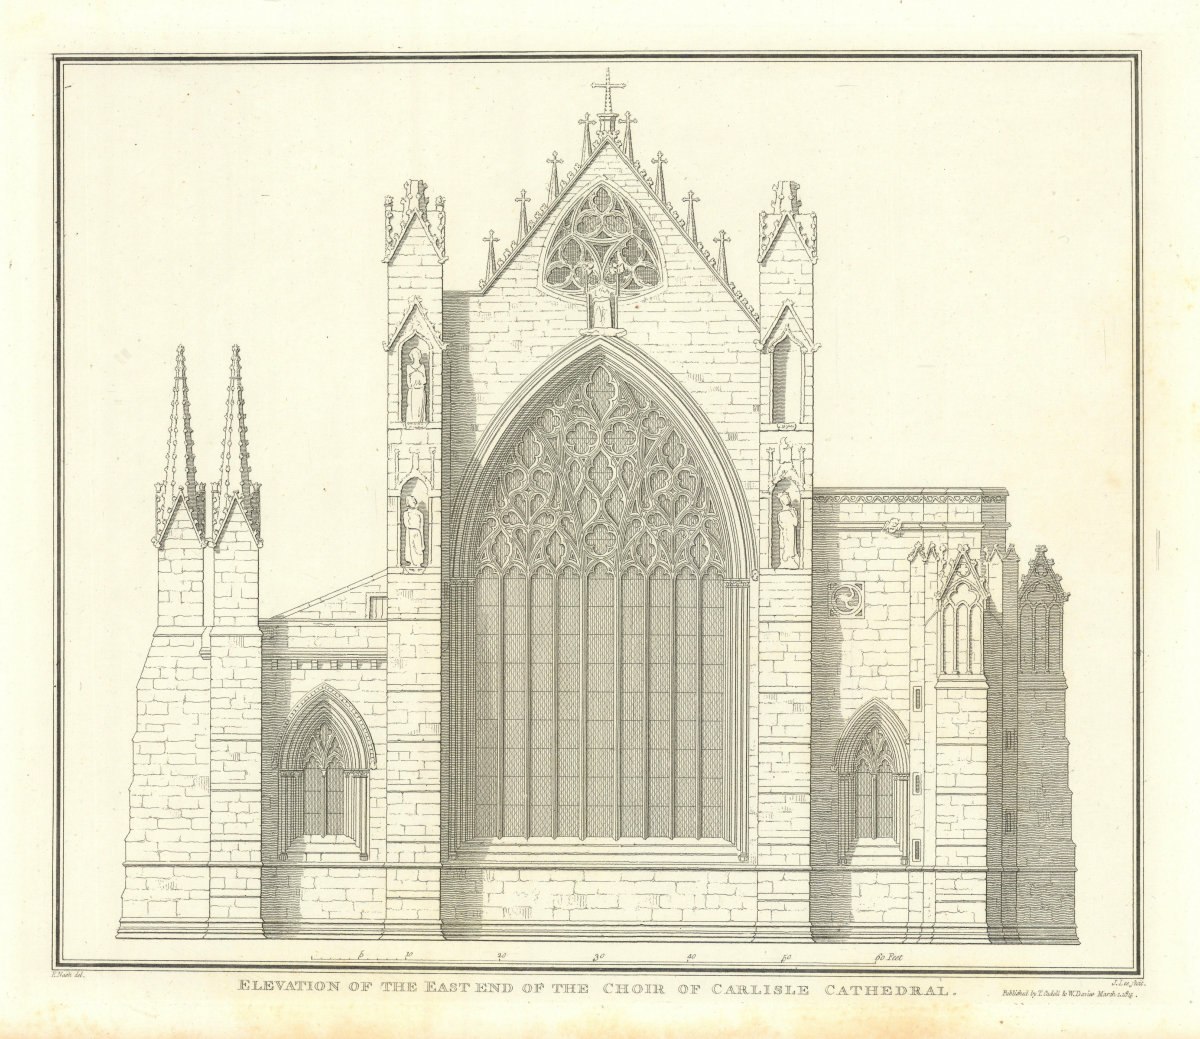 Elevation of the East End of the Choir of Carlisle Cathedral. Cumbria 1816